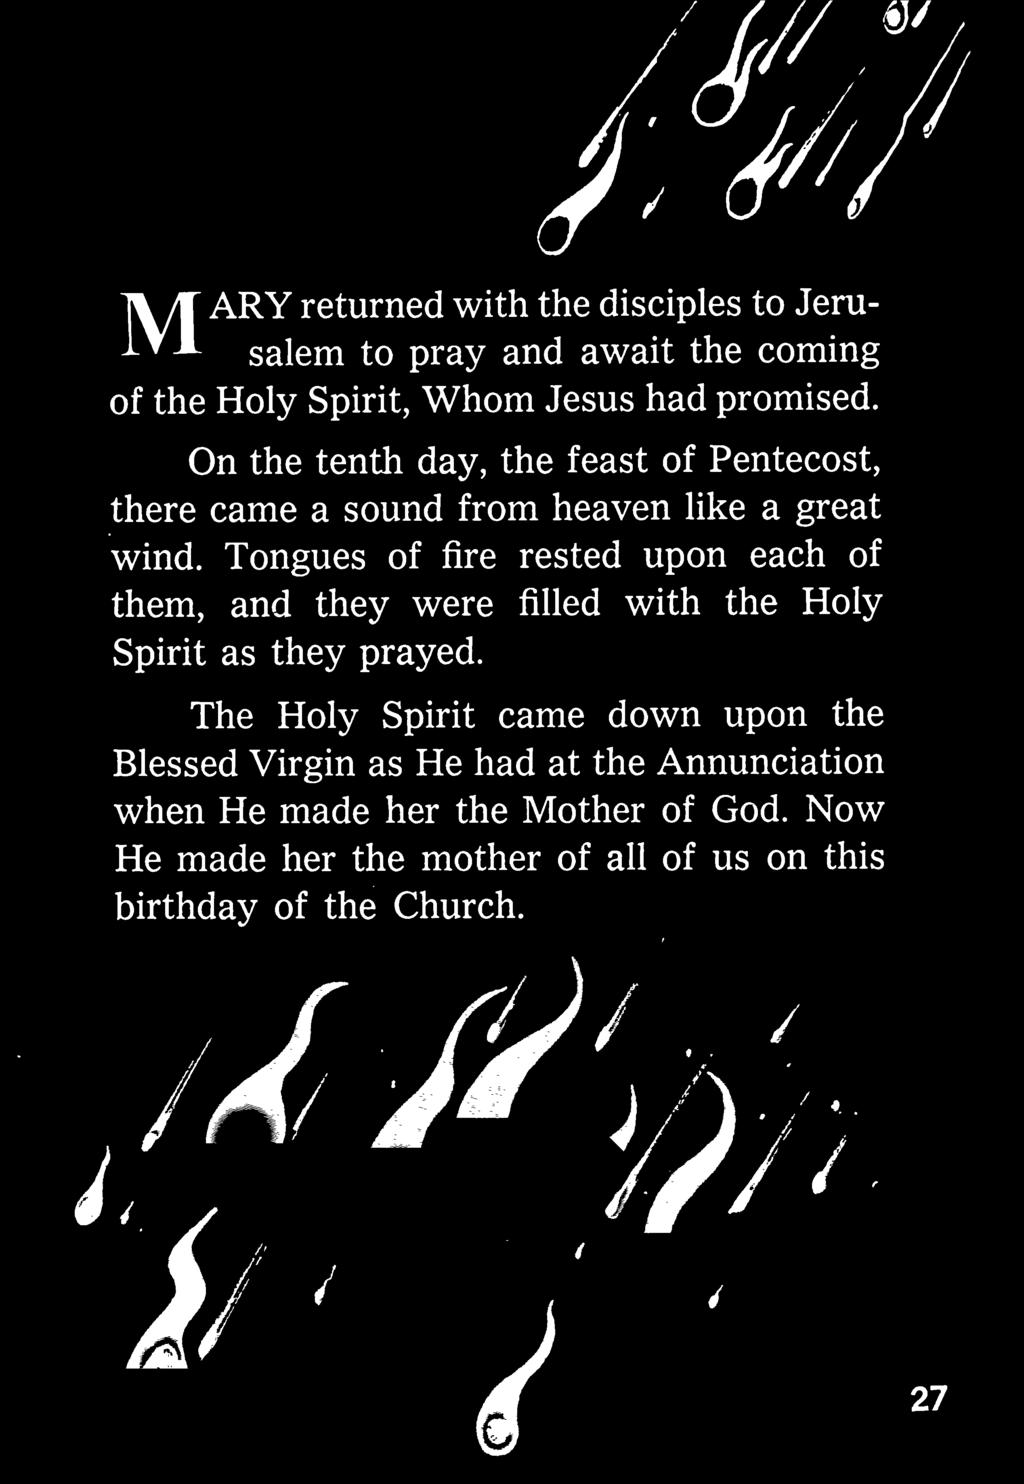 Tongues of fire rested upon each of them, and they were filled with the Holy Spirit as they prayed.